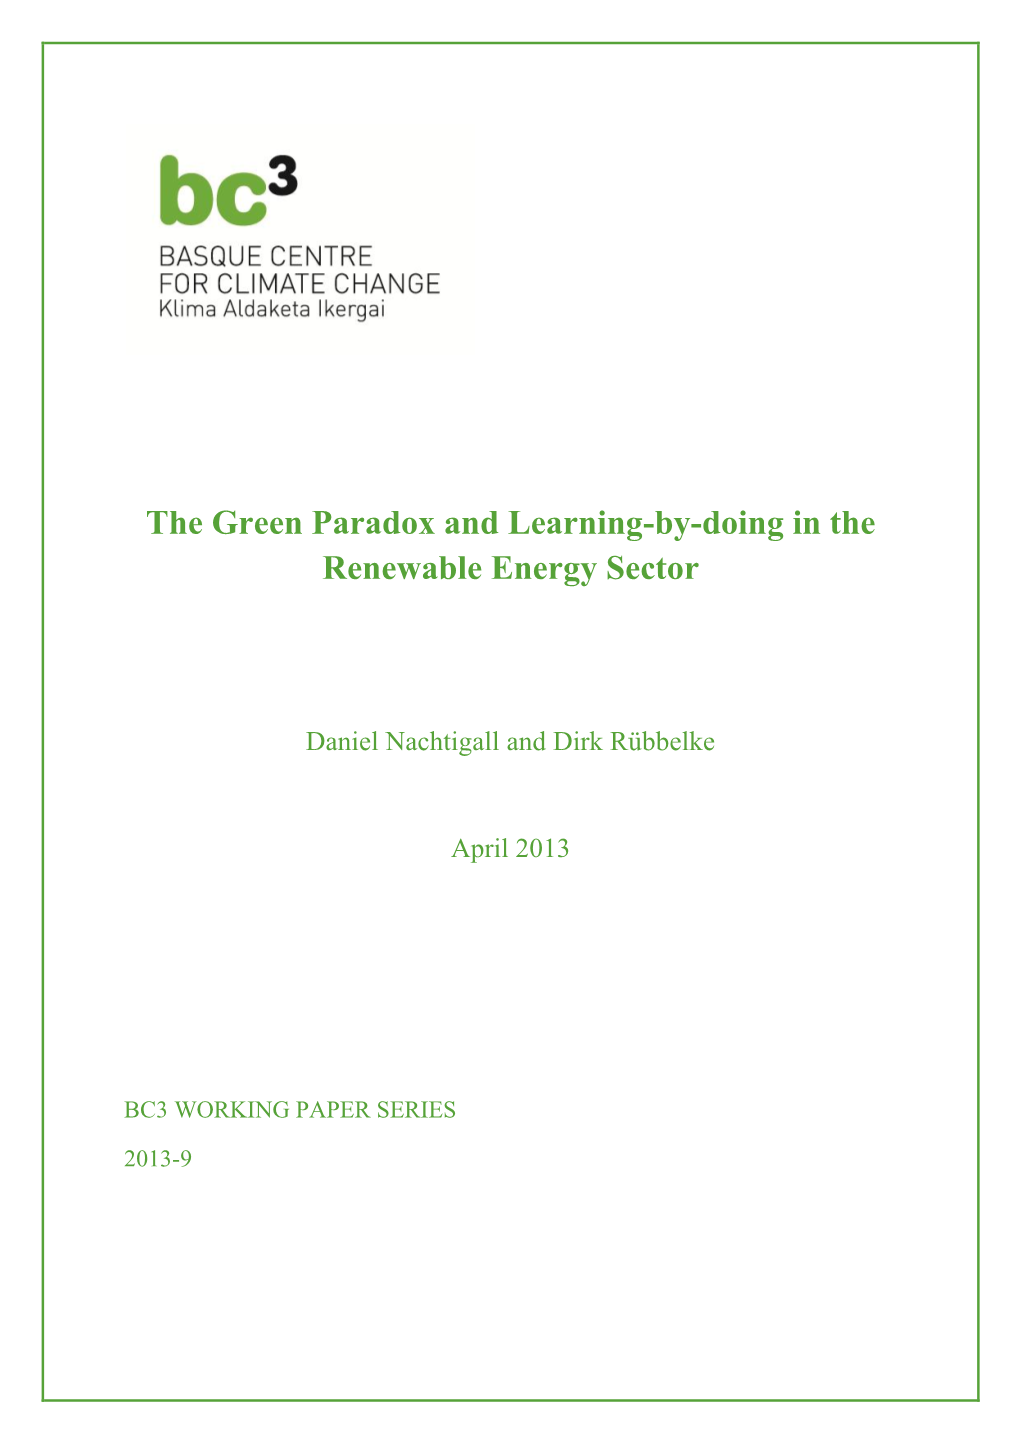 The Green Paradox and Learning-By-Doing in the Renewable Energy Sector